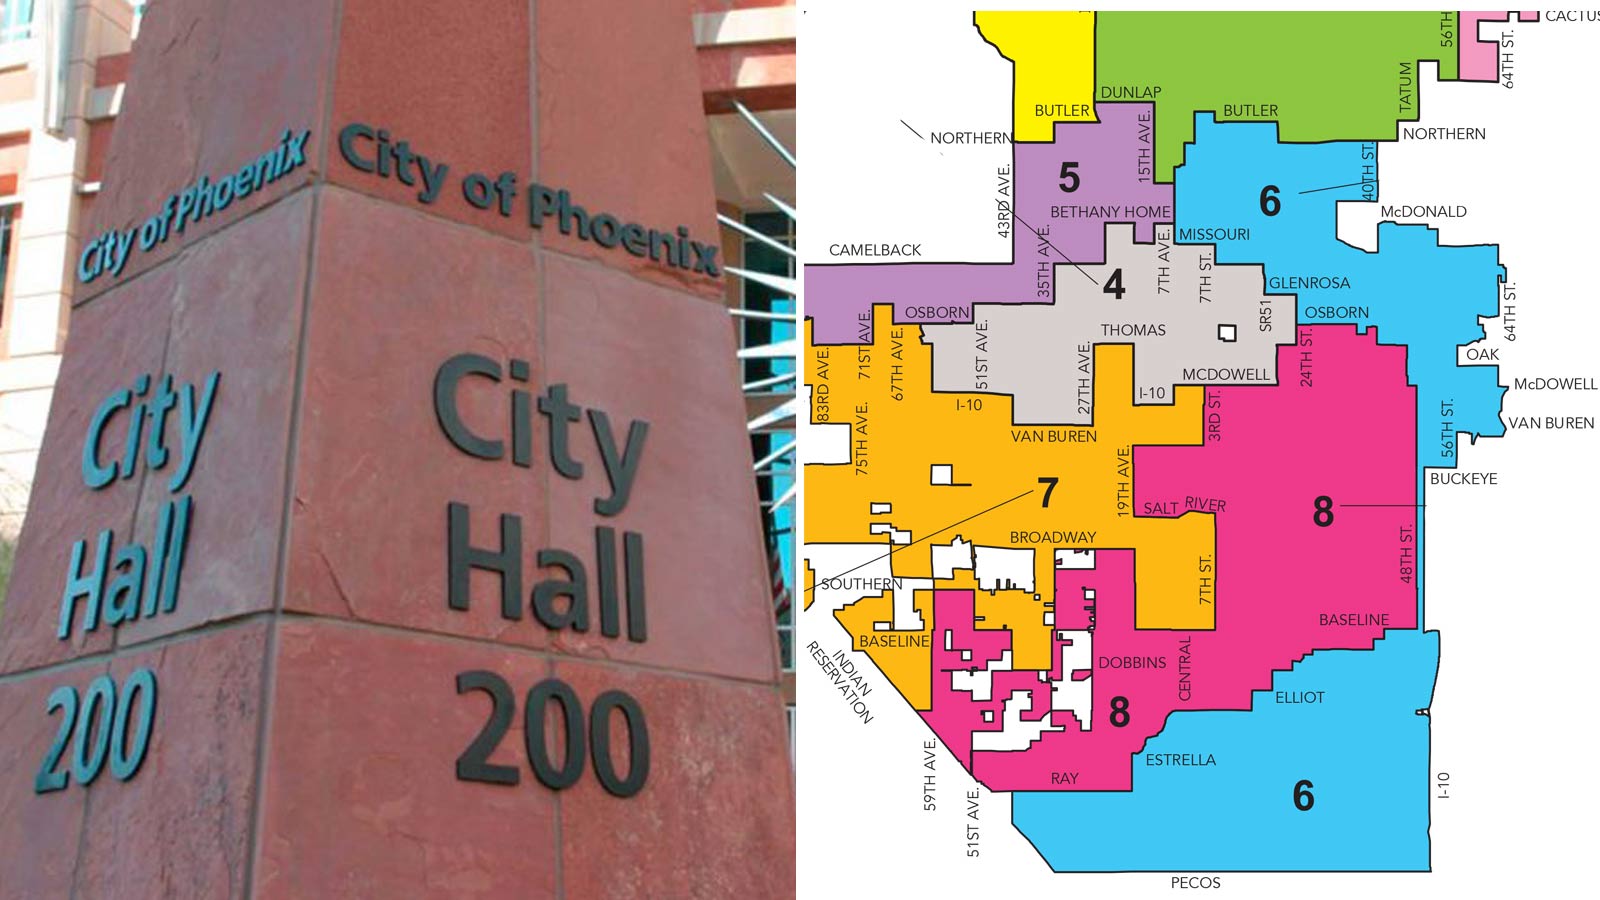 Voters in 2 Phoenix districts to decide city council runoff election Tuesday